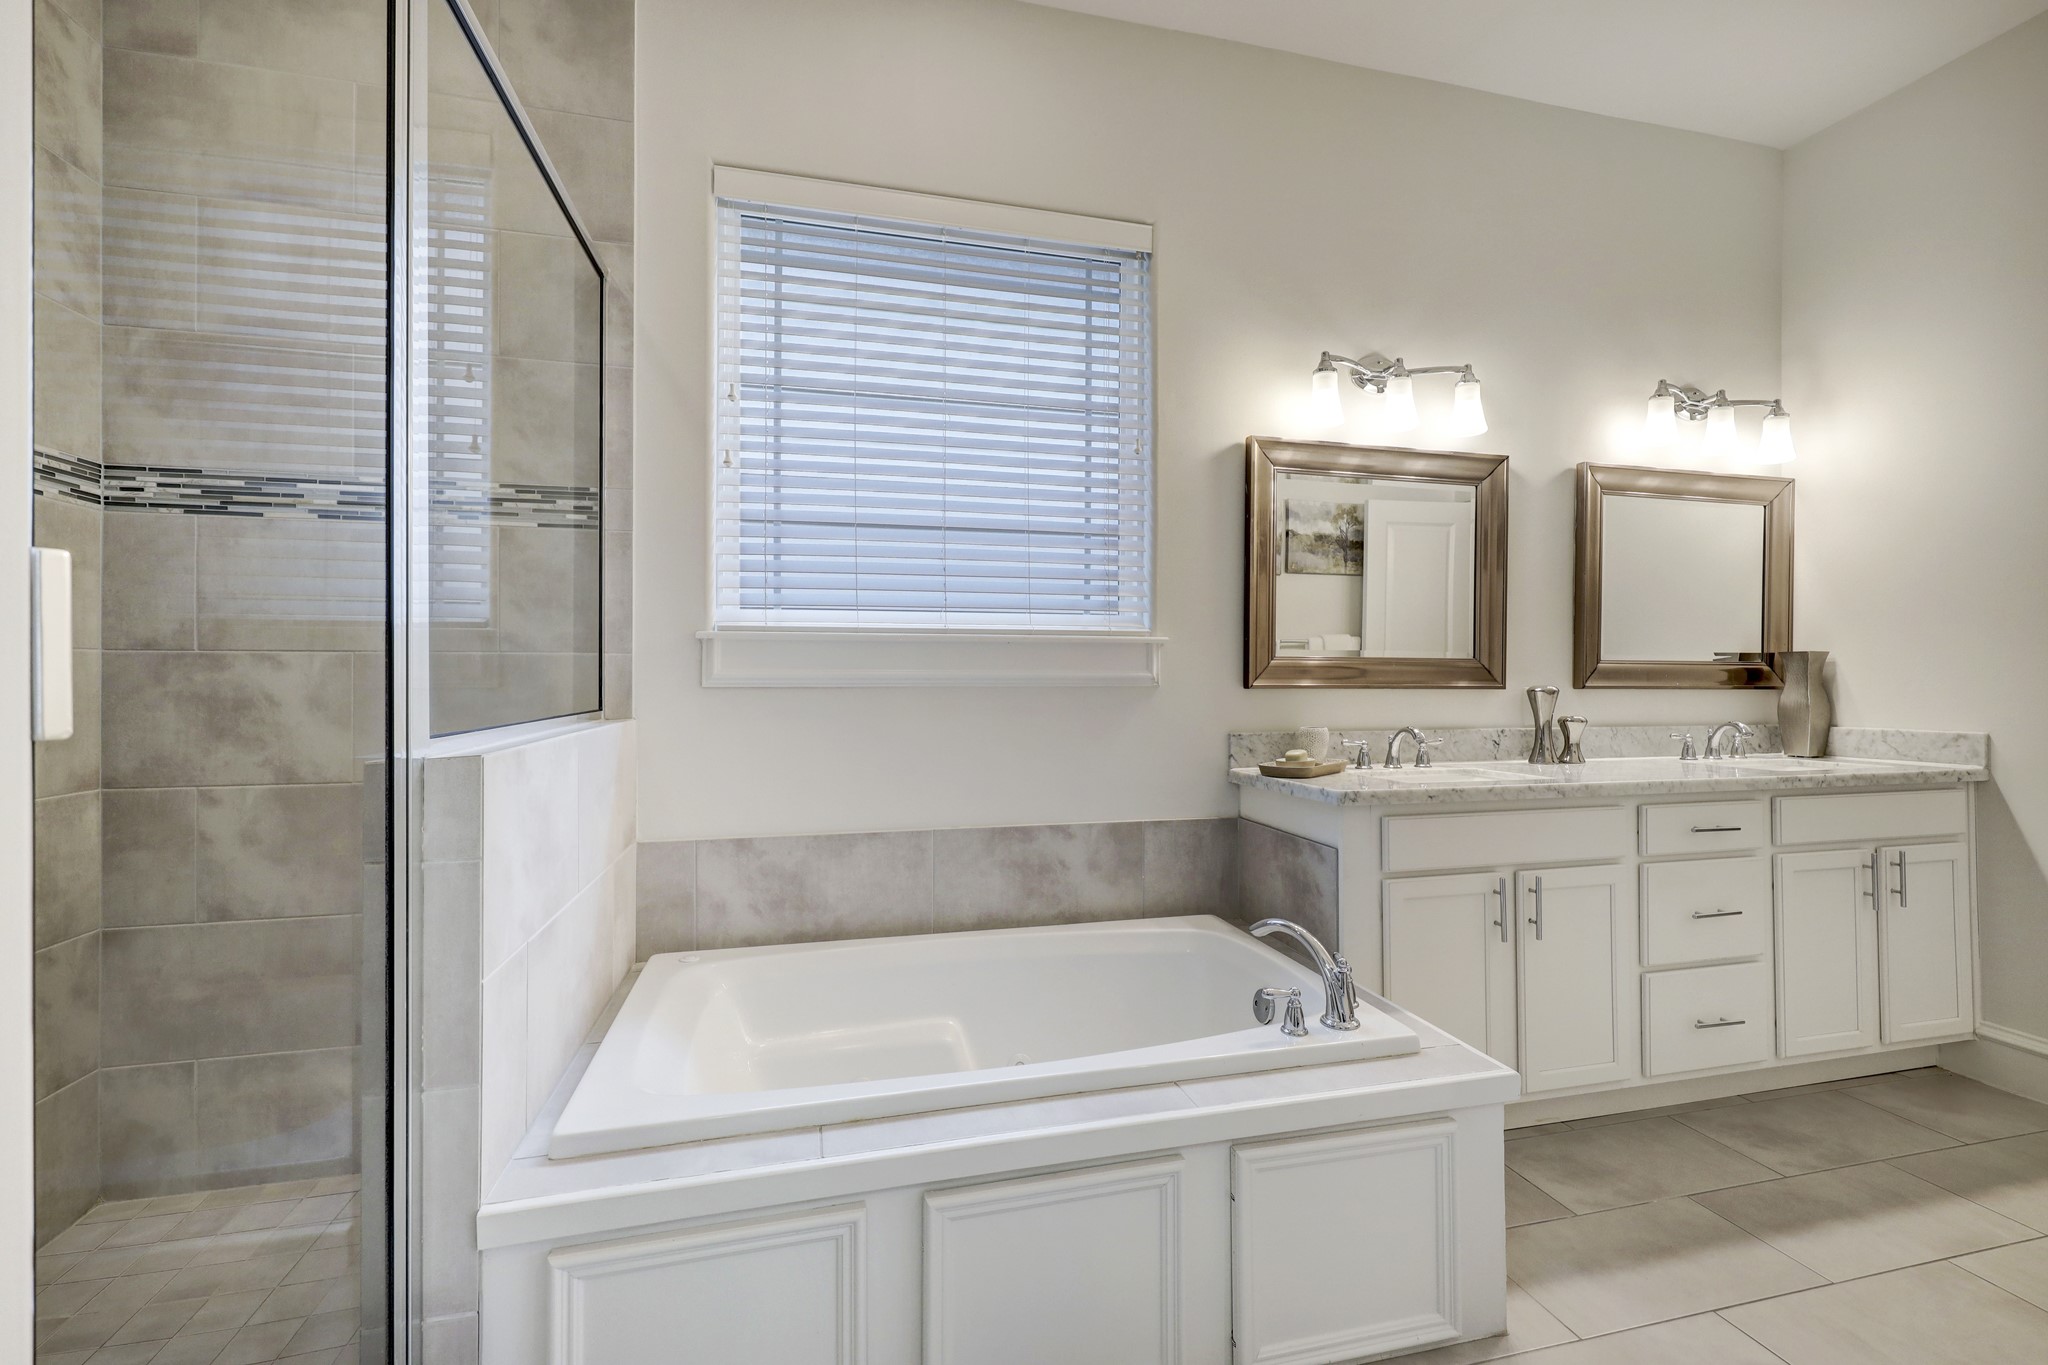 In addition to a walk-in shower, the primary bathroom features a huge jetted tub for relaxing after a long day.